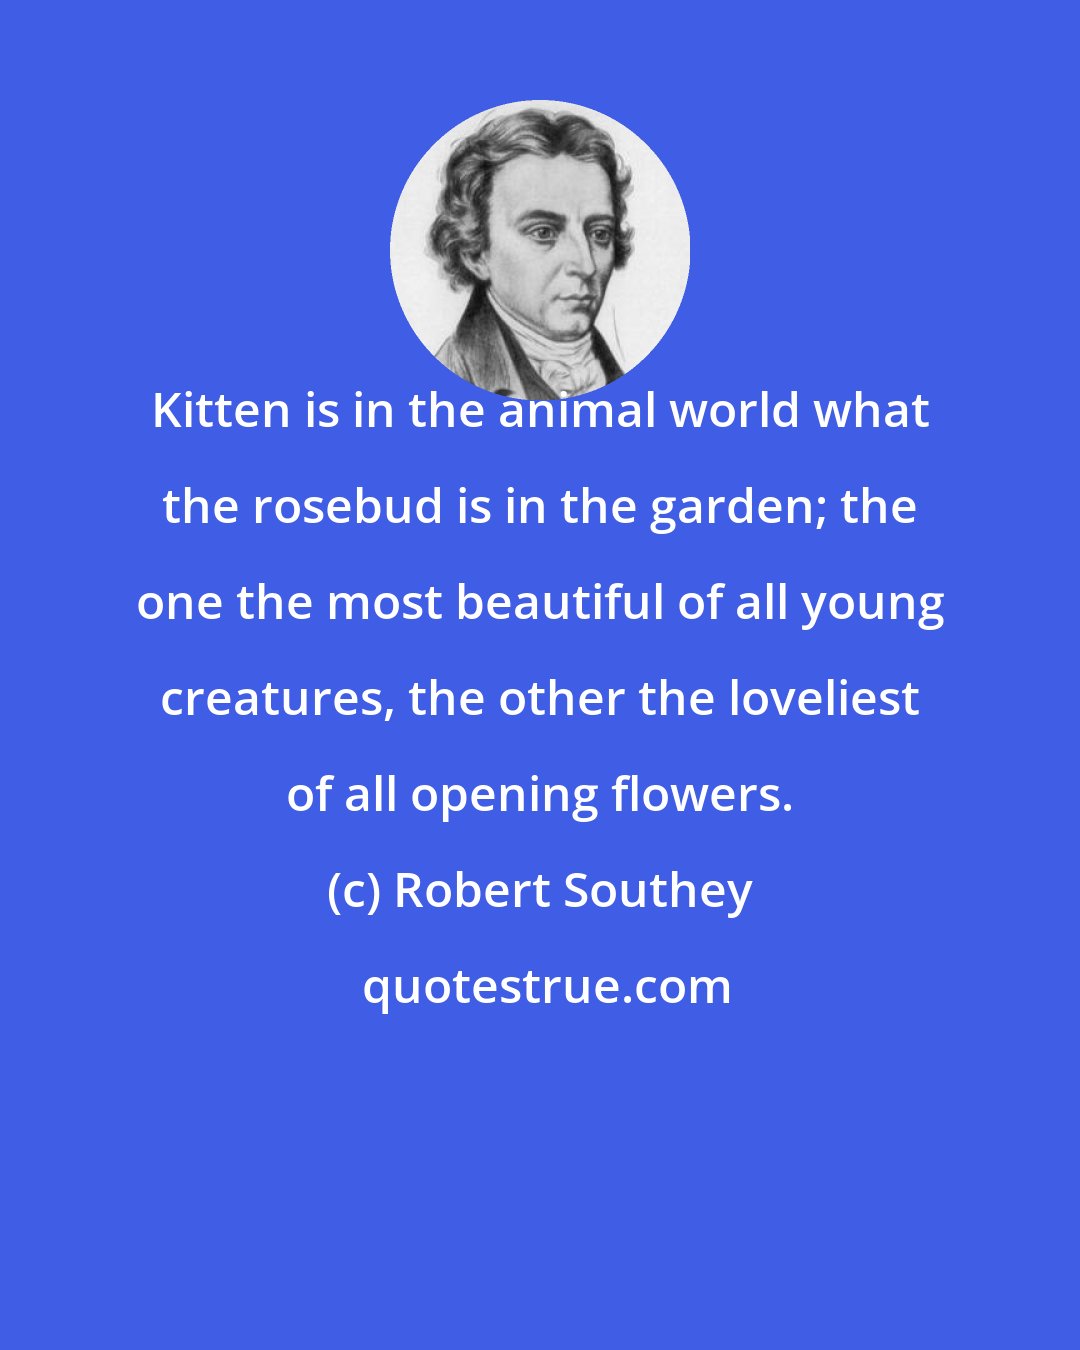 Robert Southey: Kitten is in the animal world what the rosebud is in the garden; the one the most beautiful of all young creatures, the other the loveliest of all opening flowers.